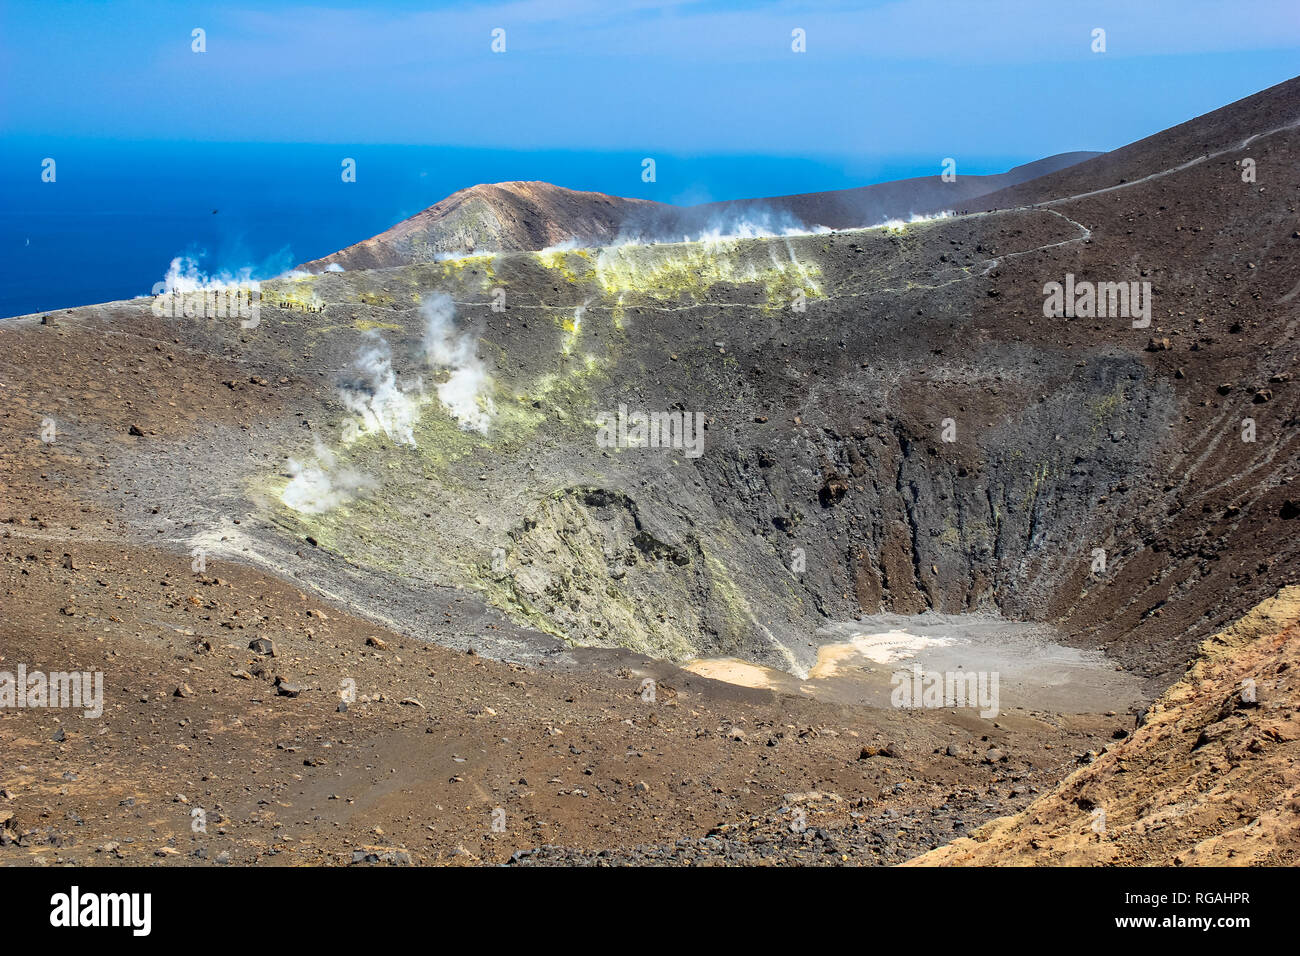 The crater of a volcano at Vulcano Island in Italy attracts tourists with the steams of sulphur. Stock Photo